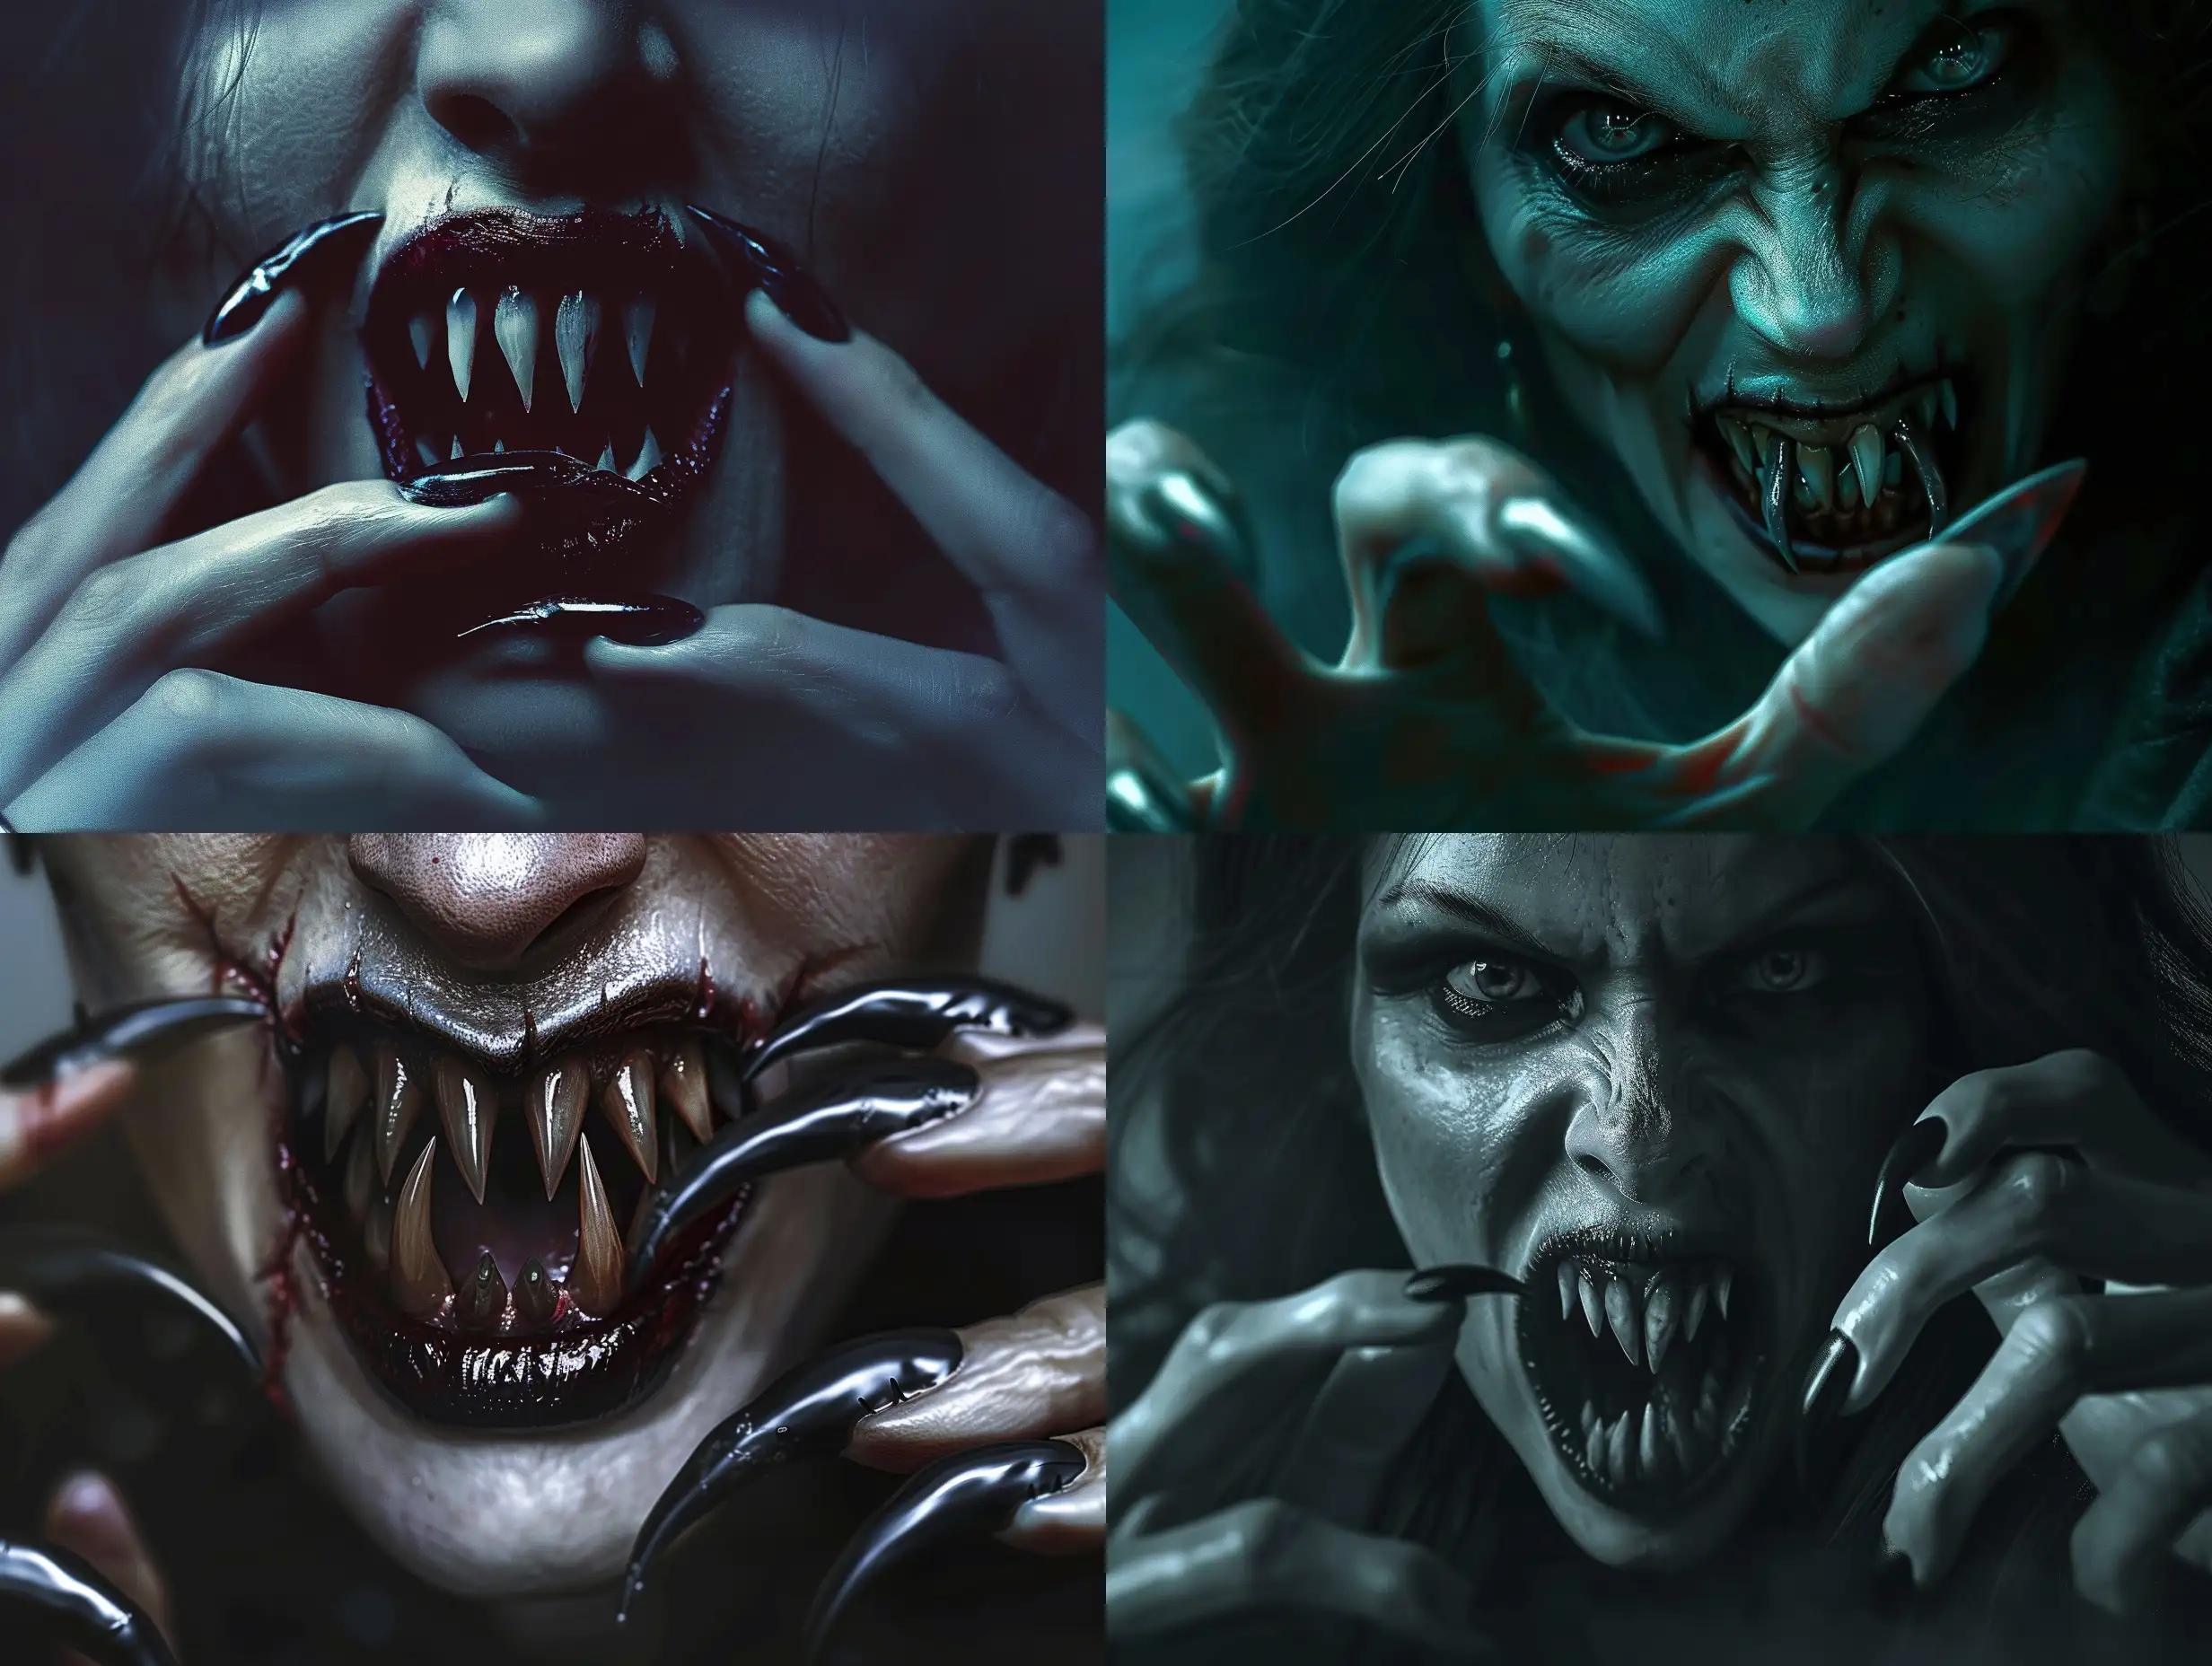 Photorealism of a monstrous female vampire with long, curved, pointed nails, exuding an aggressive and terrifying presence. Her pointed, crooked teeth convey a scary expression amidst a dark and atmospheric setting. The high-quality, photorealistic depiction should emphasize the aggressive and scary predator nature, showcasing detailed nails and fangs. The lighting should create an atmospheric and horrifying ambiance. The full-body portrayal should exhibit realistic hyper-detail, capturing playful character designs and full anatomical features, including distinctly human hands with five clear fingers without flaws.